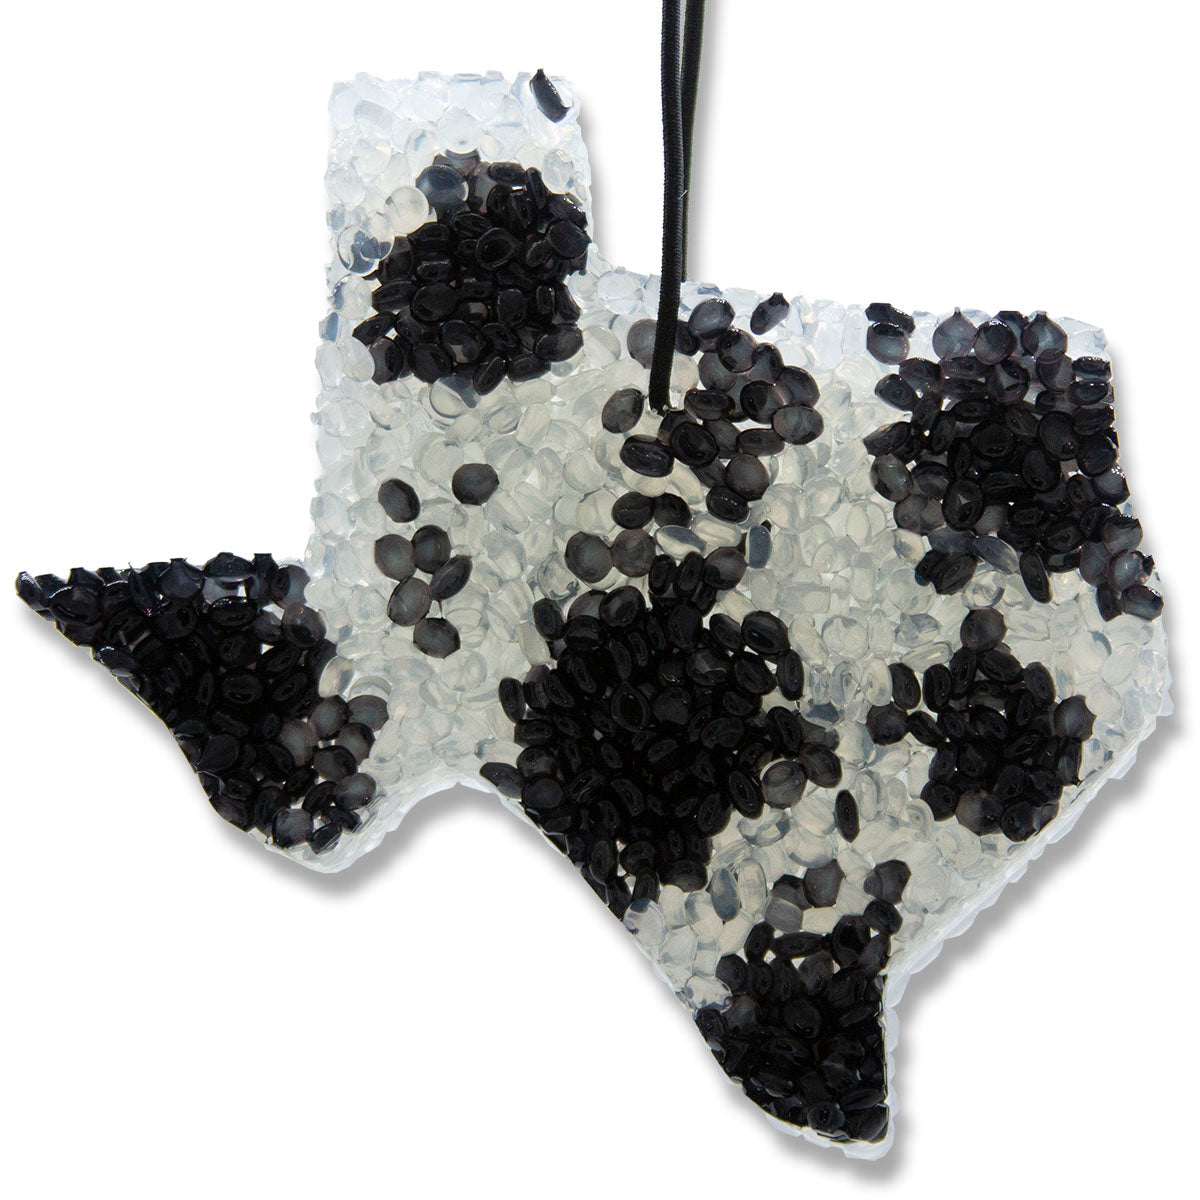 Strawberry, Lone Star Candles & More's Premium Strongly Scented Freshies, An Aroma of Sweet & Juicy Strawberries with a Hint of Sugar, Car & Air Freshener, USA Made in Texas, Black TX Cowhide 1-Pack